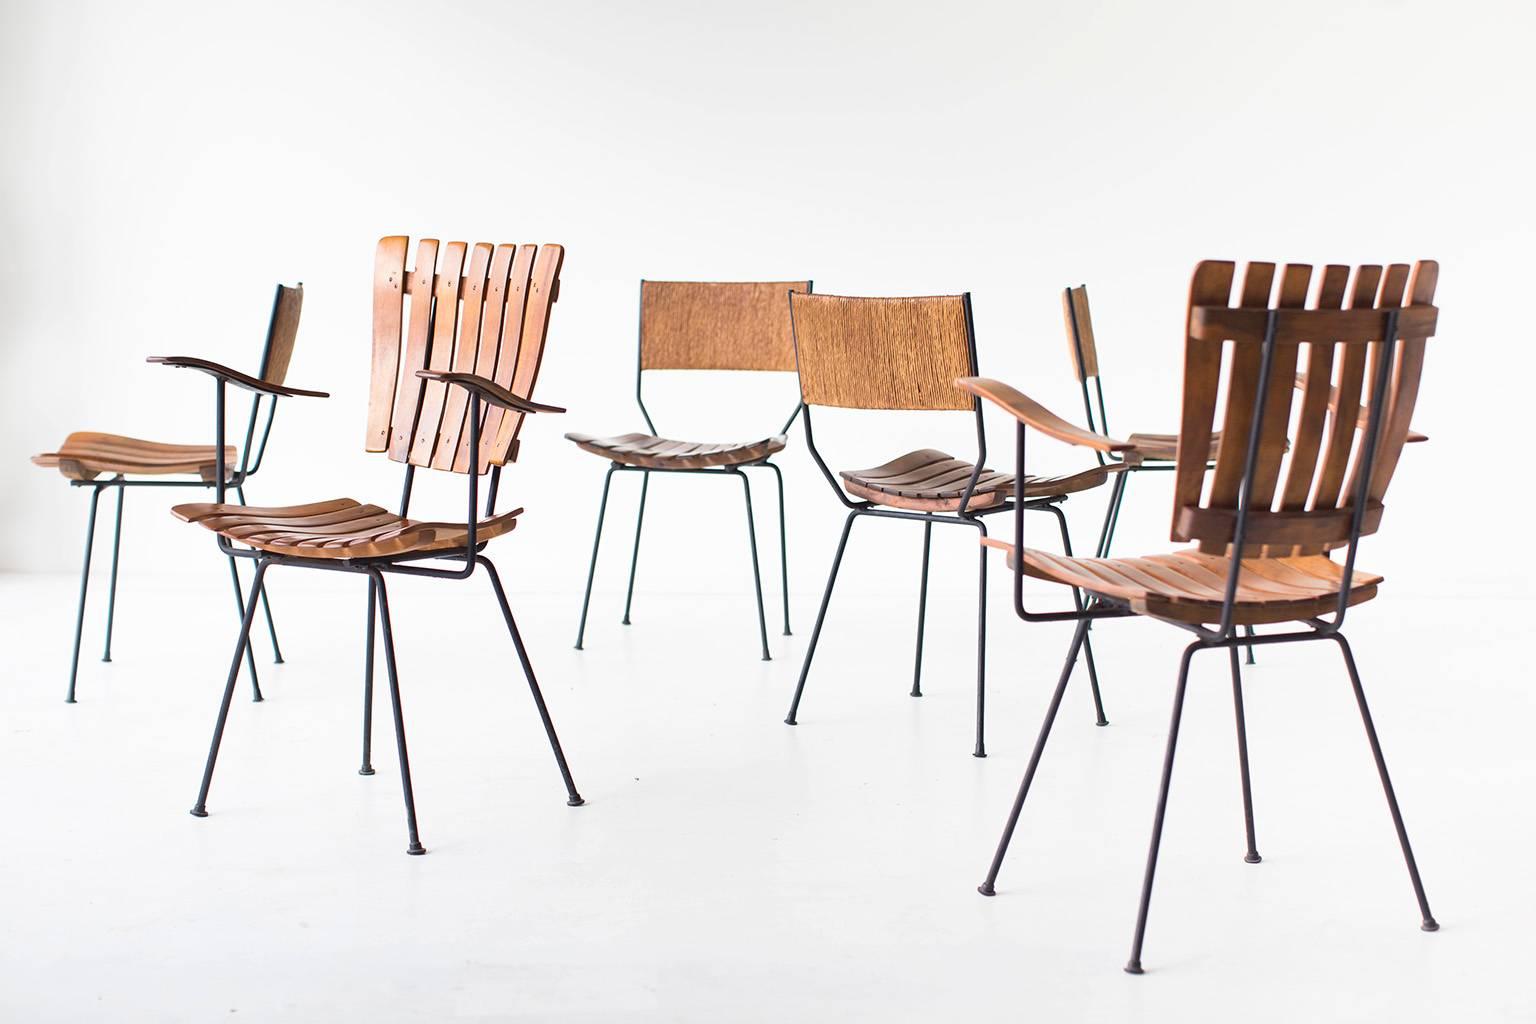 Designer: Arthur Umanoff.

Manufacturer: Raymor.
Period and model: Mid-Century Modern.
Specifications: Wood, iron.

Condition:

**The Armchairs have sold from this set.** Price has been adjusted.
This Arthur Umanoff dining set for Raymor is in very